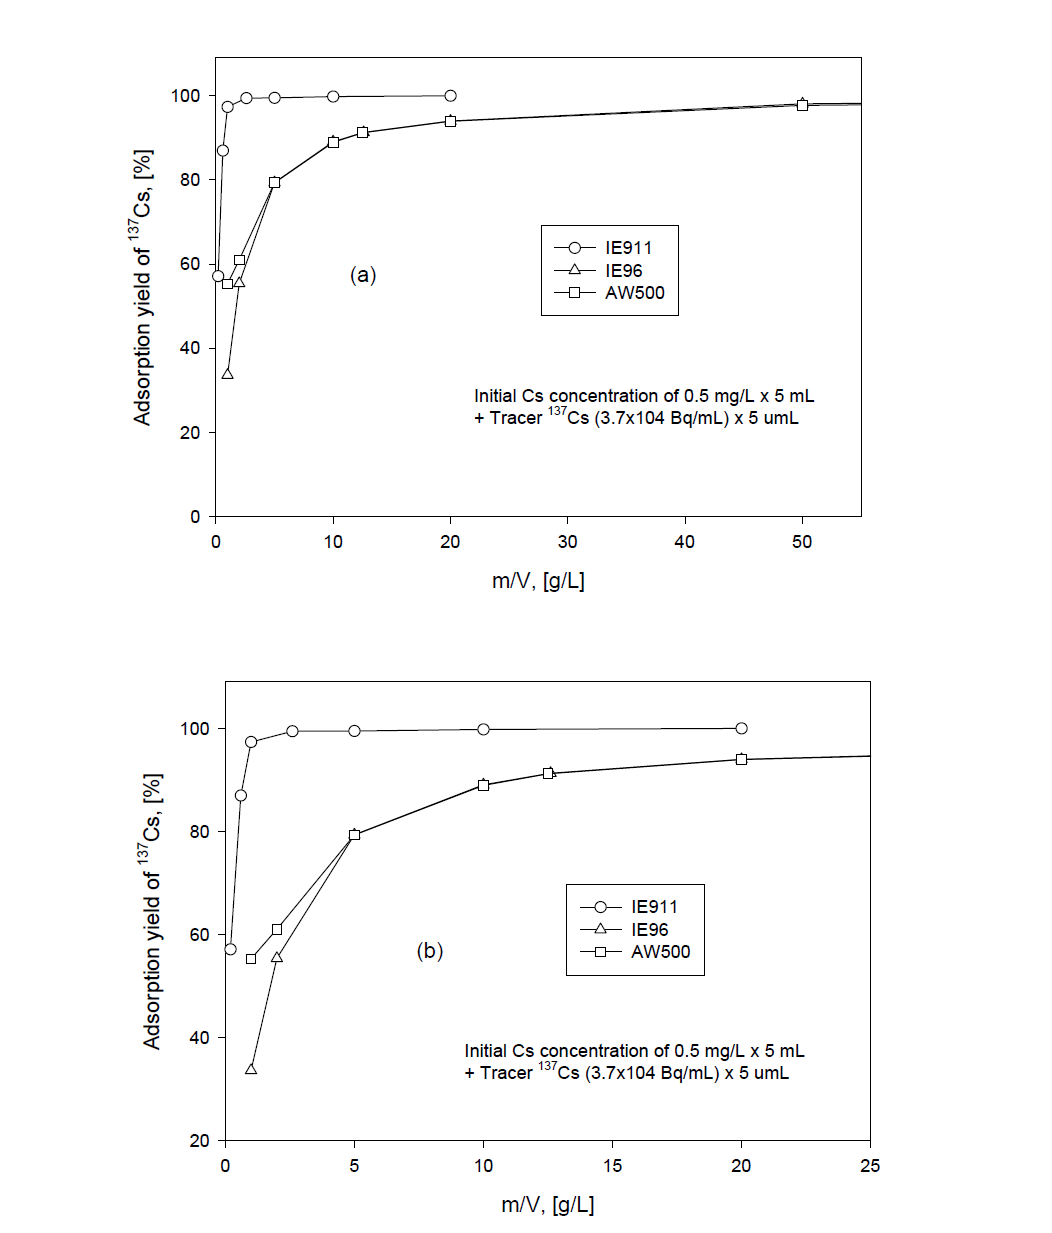 Adsorption yield of Cs with ratio of m/V at 0.5 mg/L initial Cs concentration.